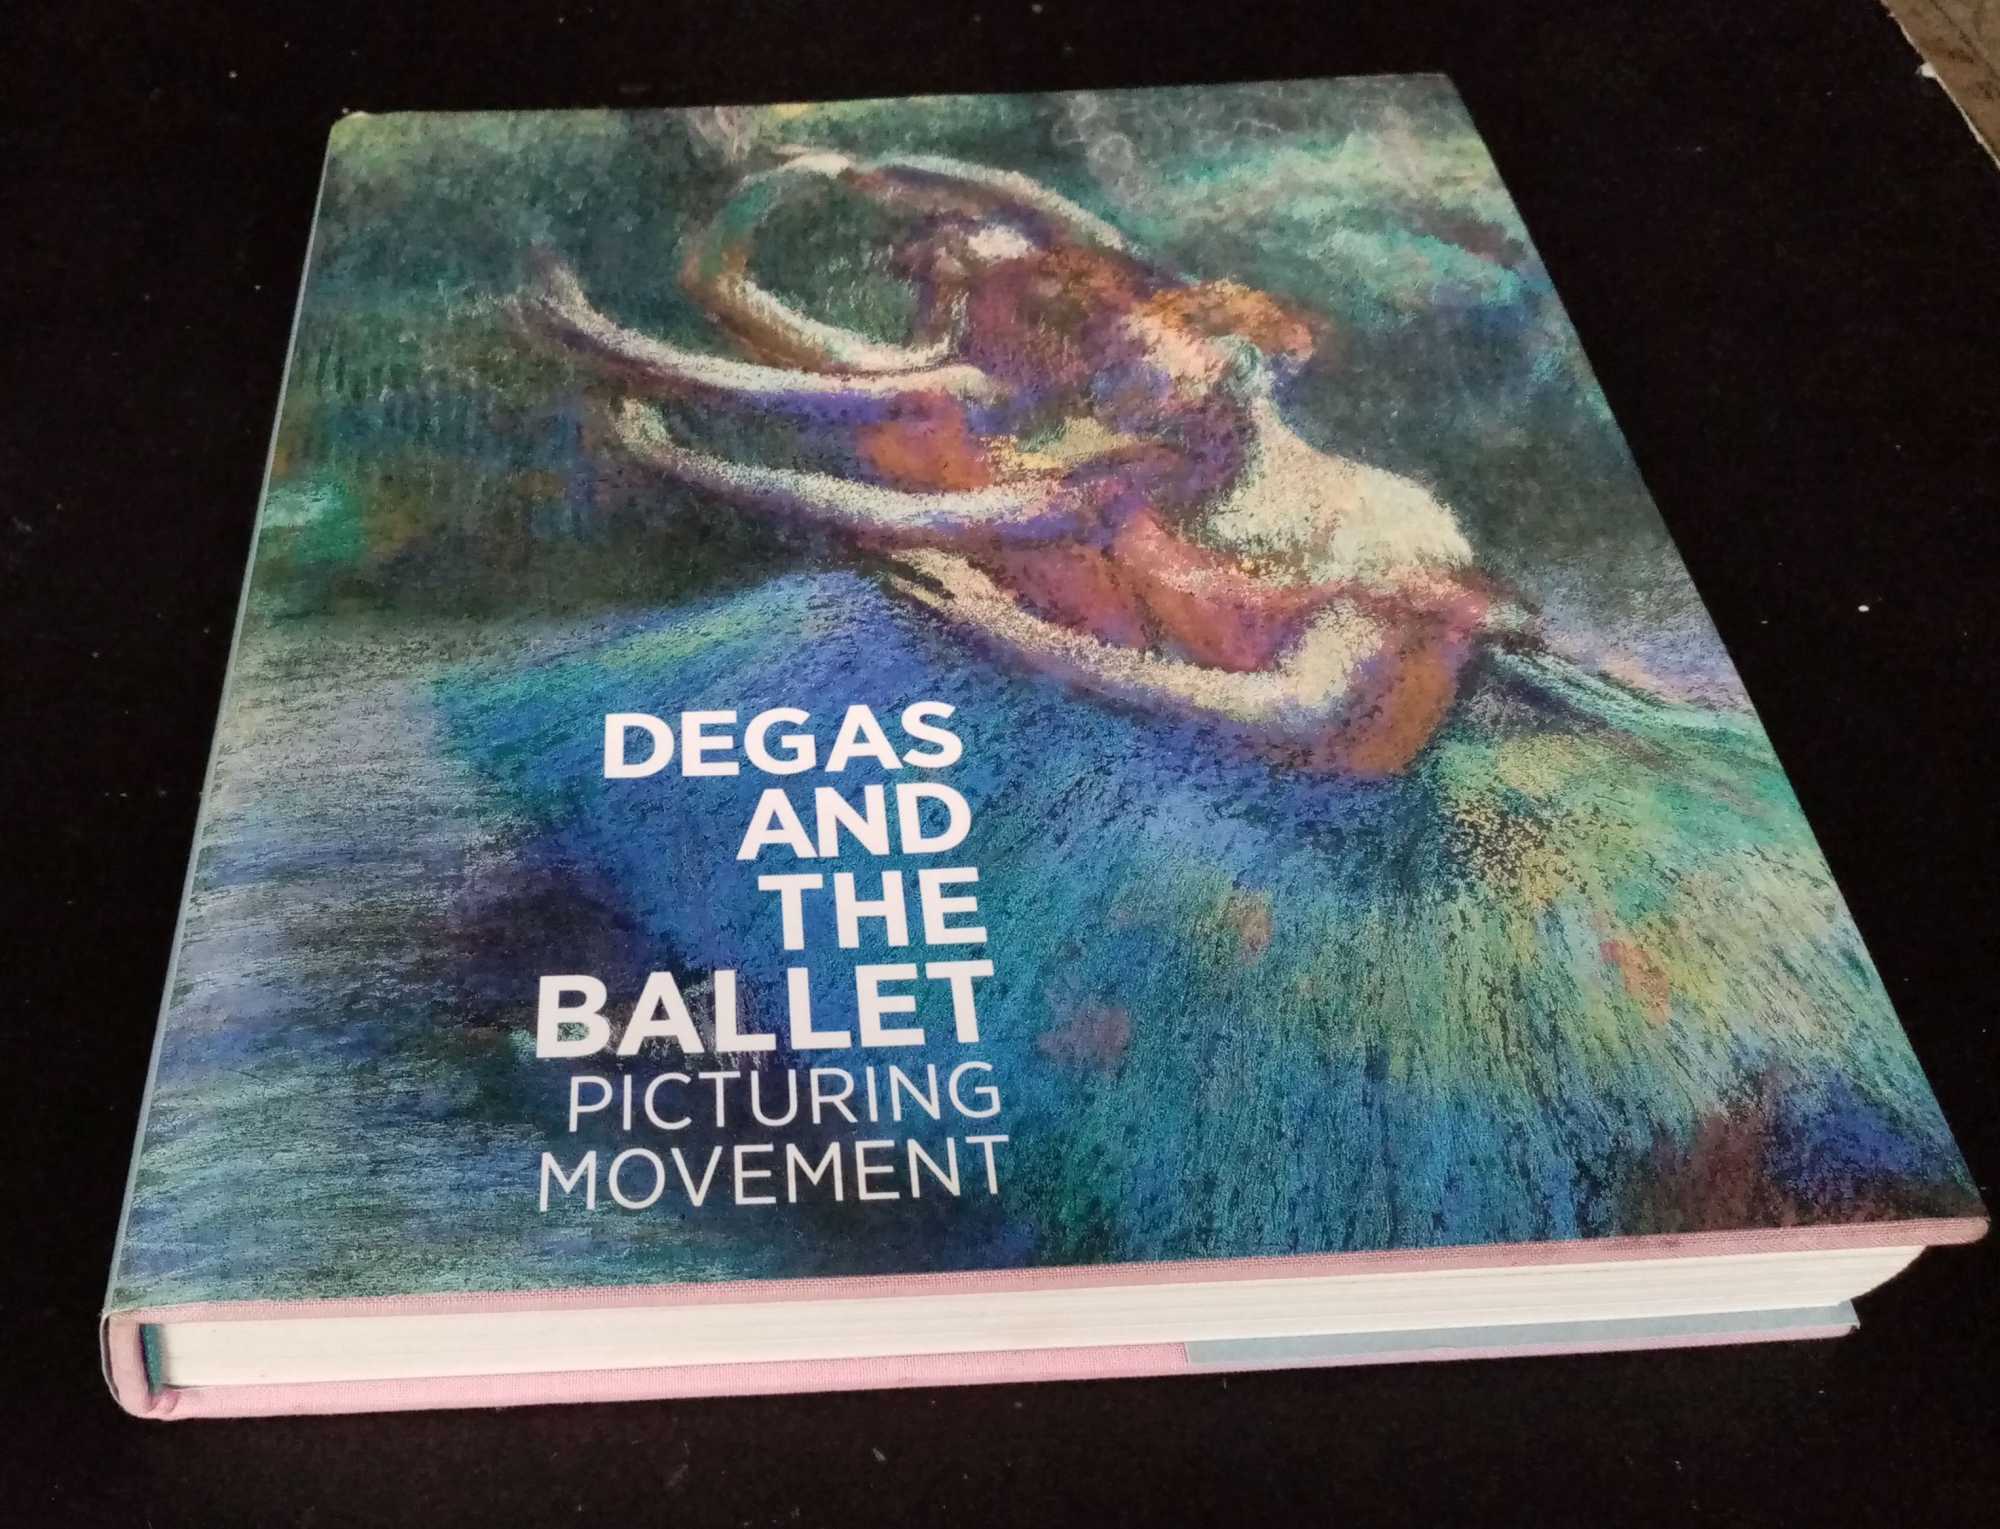 Richard Kendall - Degas and the Ballet: Picturing Movement